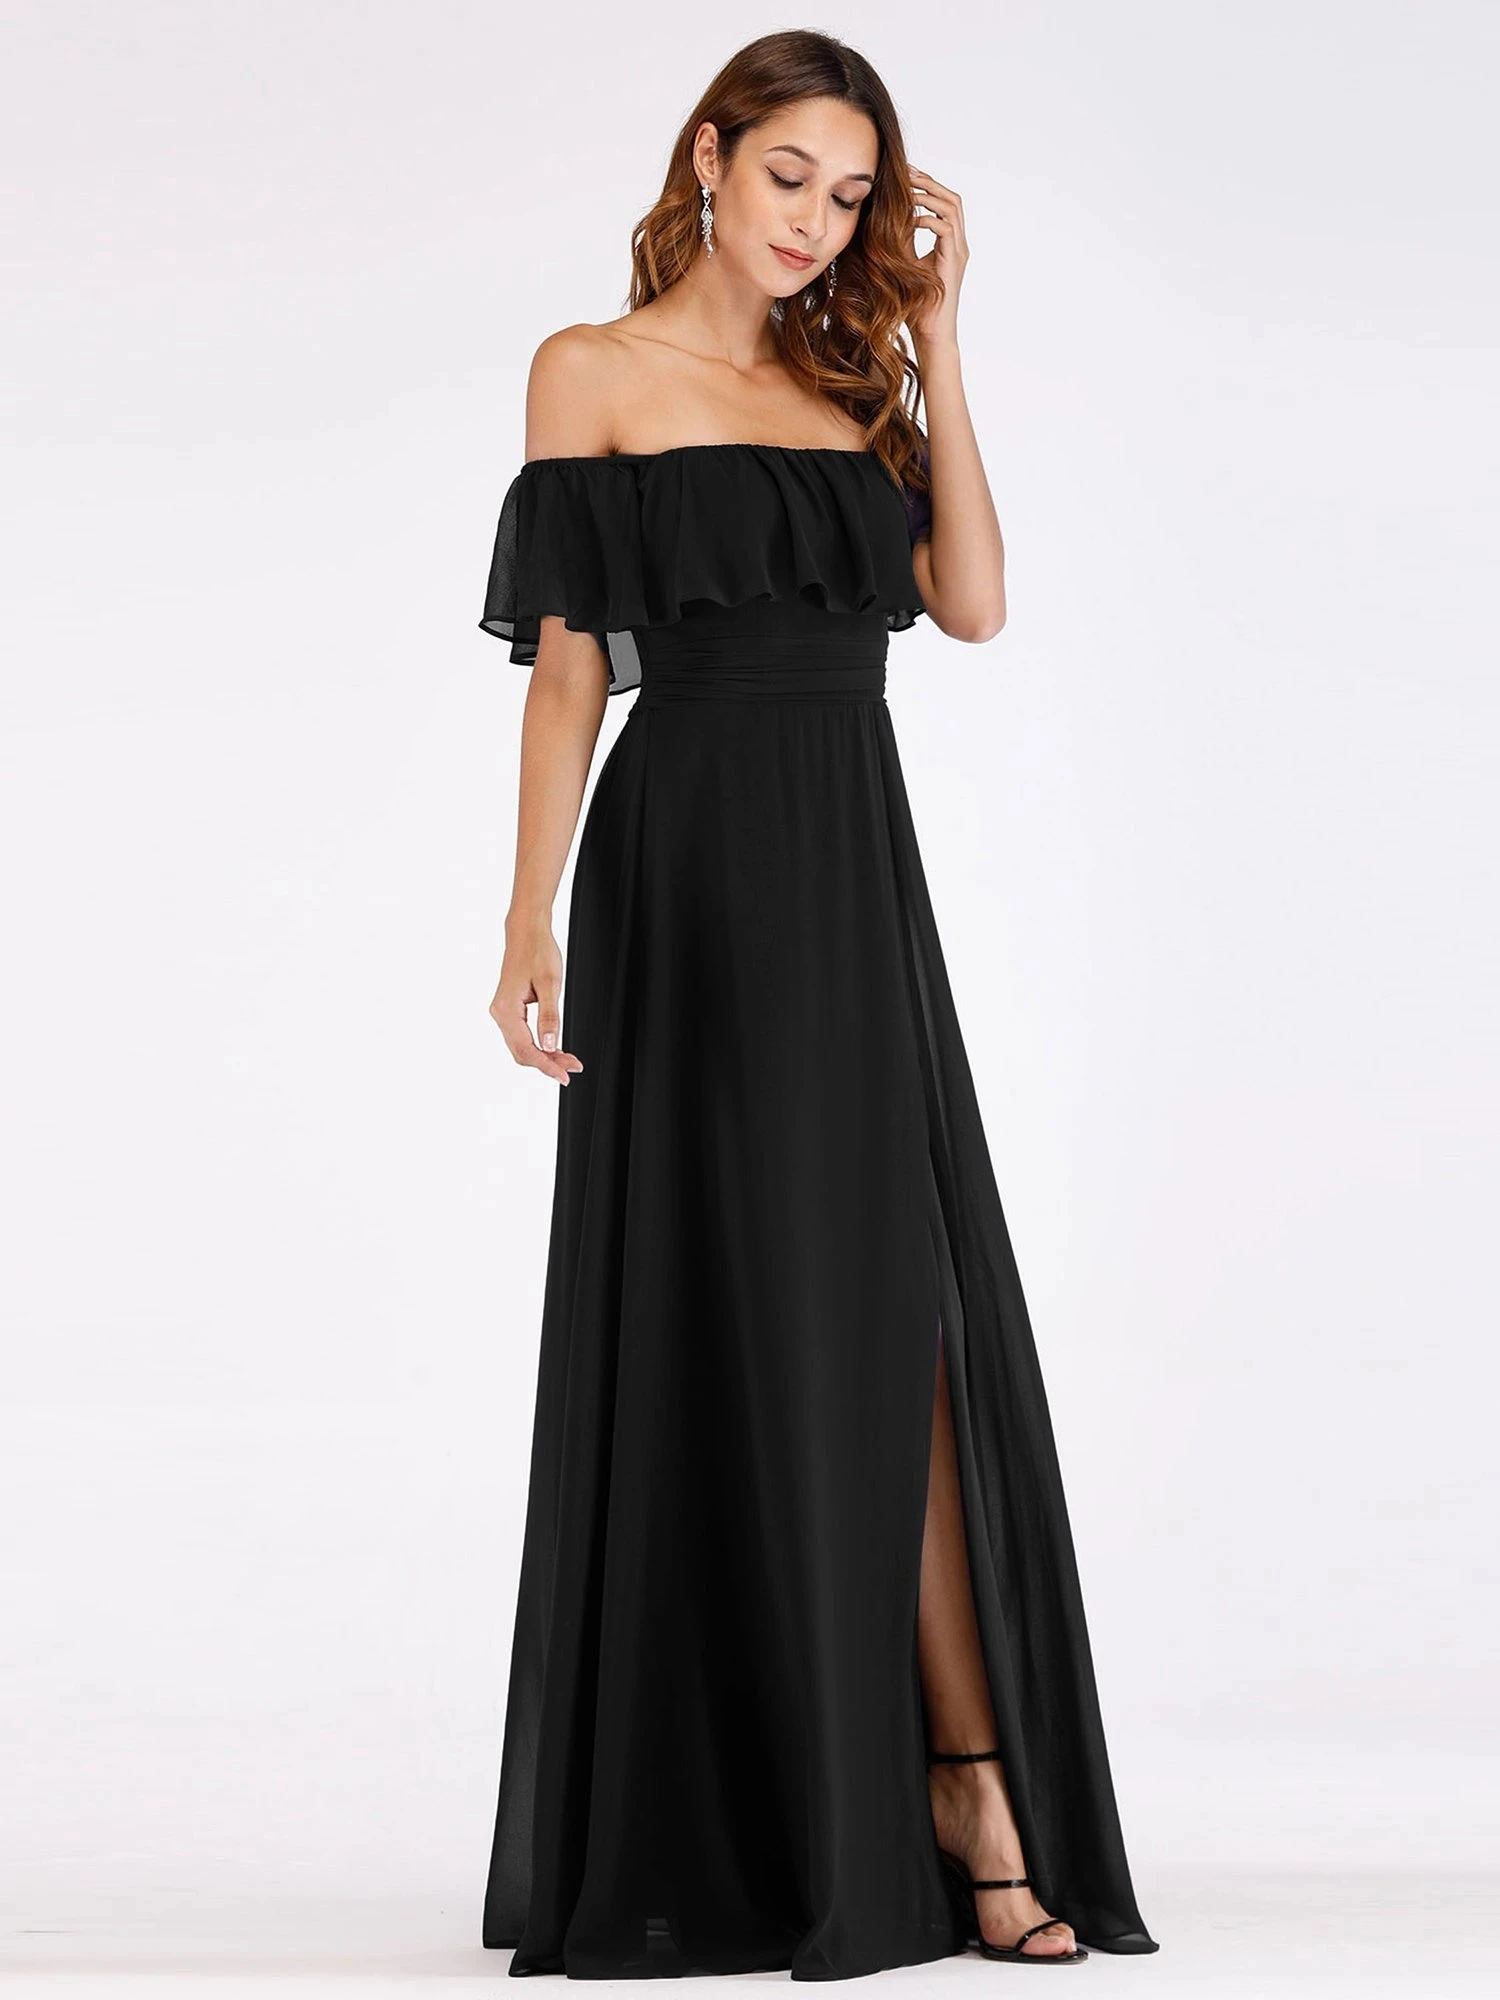 

Black Evening Dresses For Women Party Ever Pretty EP00968 Women's Off Shoulder Ruffle Thigh Split Formal Gown Plus Size